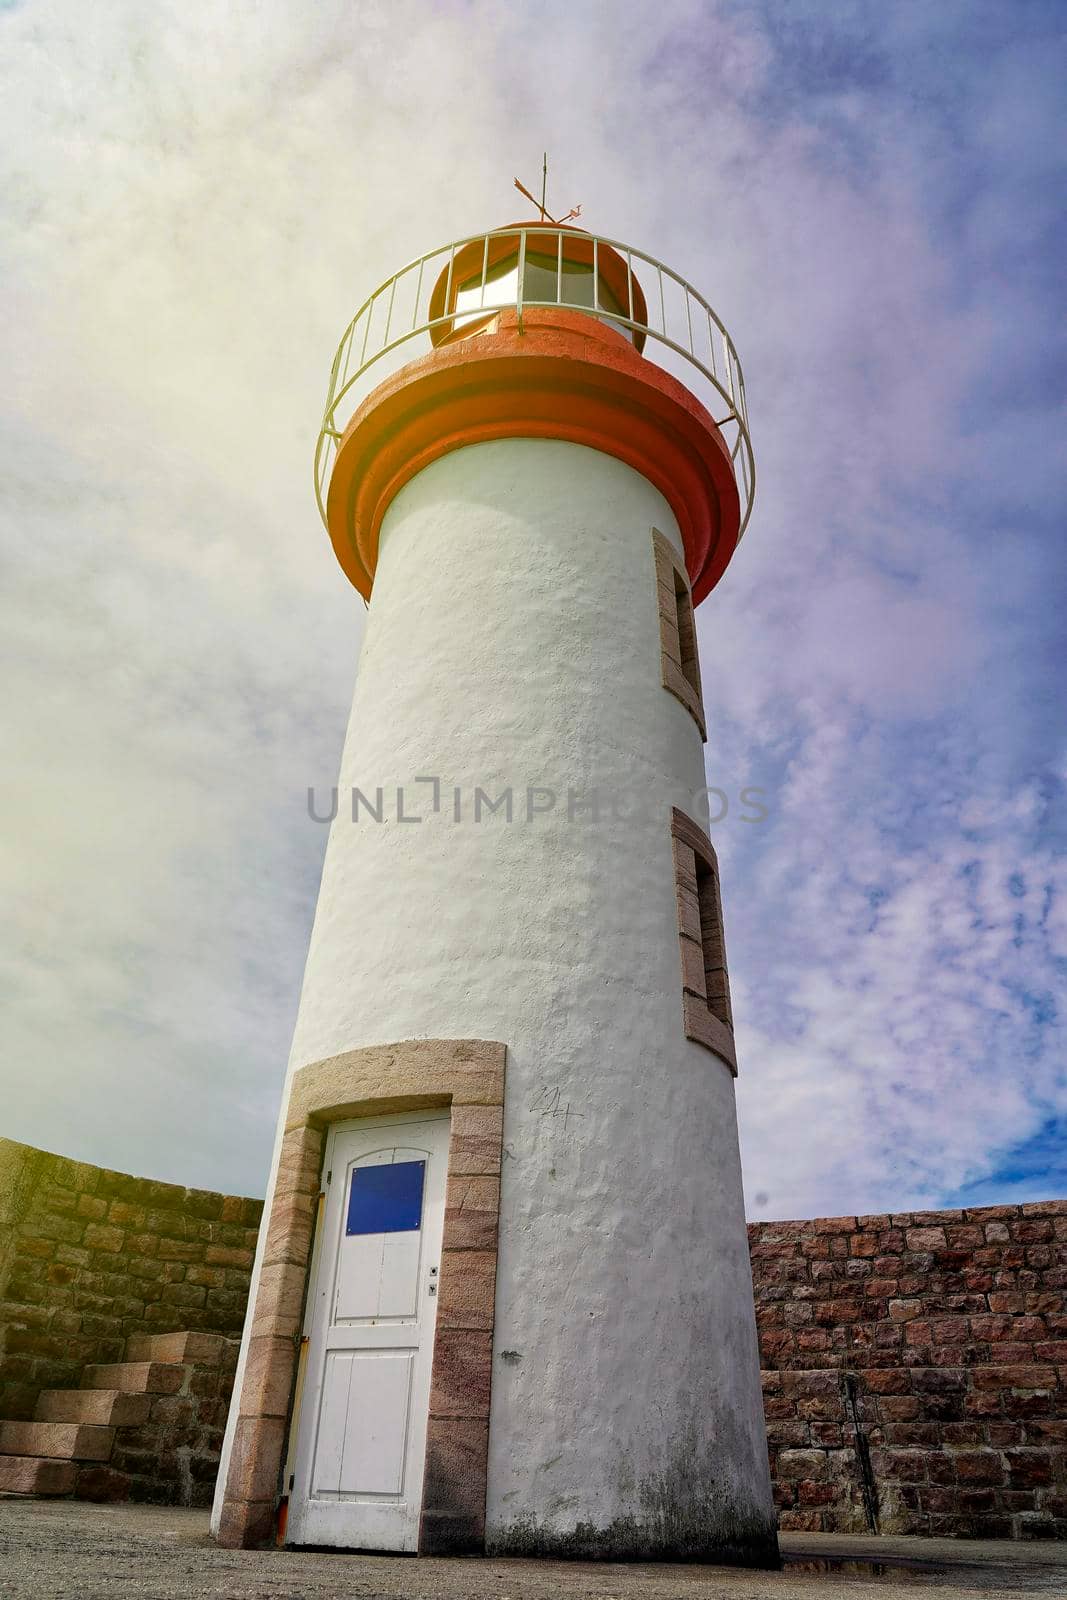 Architectural image of a lighthouse with blue sky